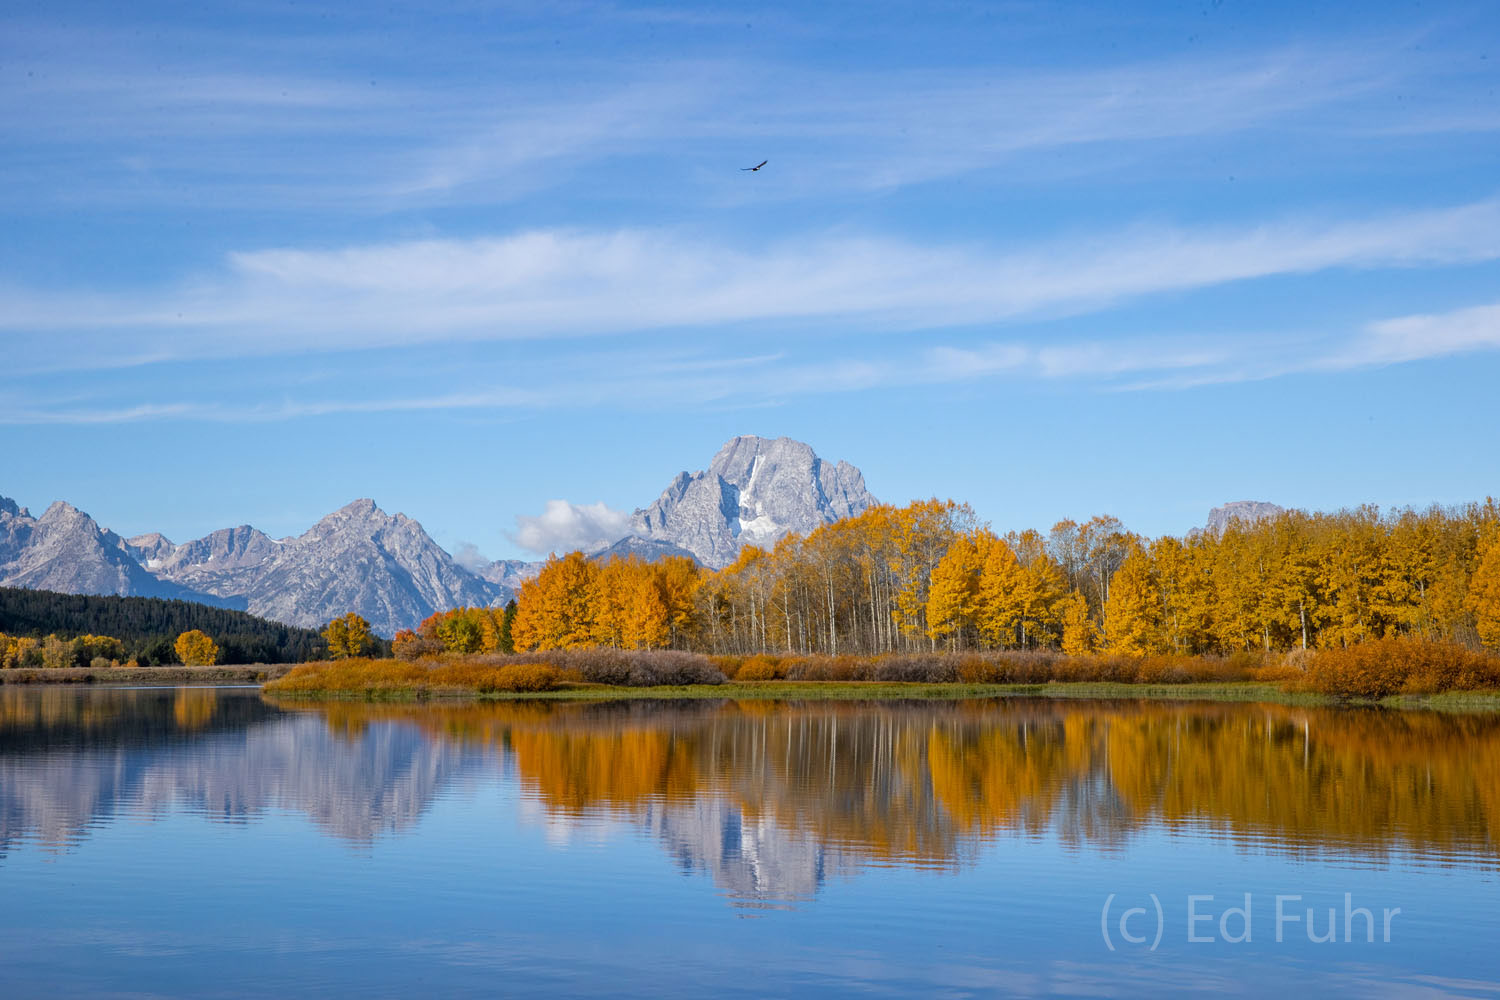 A bald eagle soars, ever higher, above the meandering waters of this curve in the Snake River at Oxbow Bend.